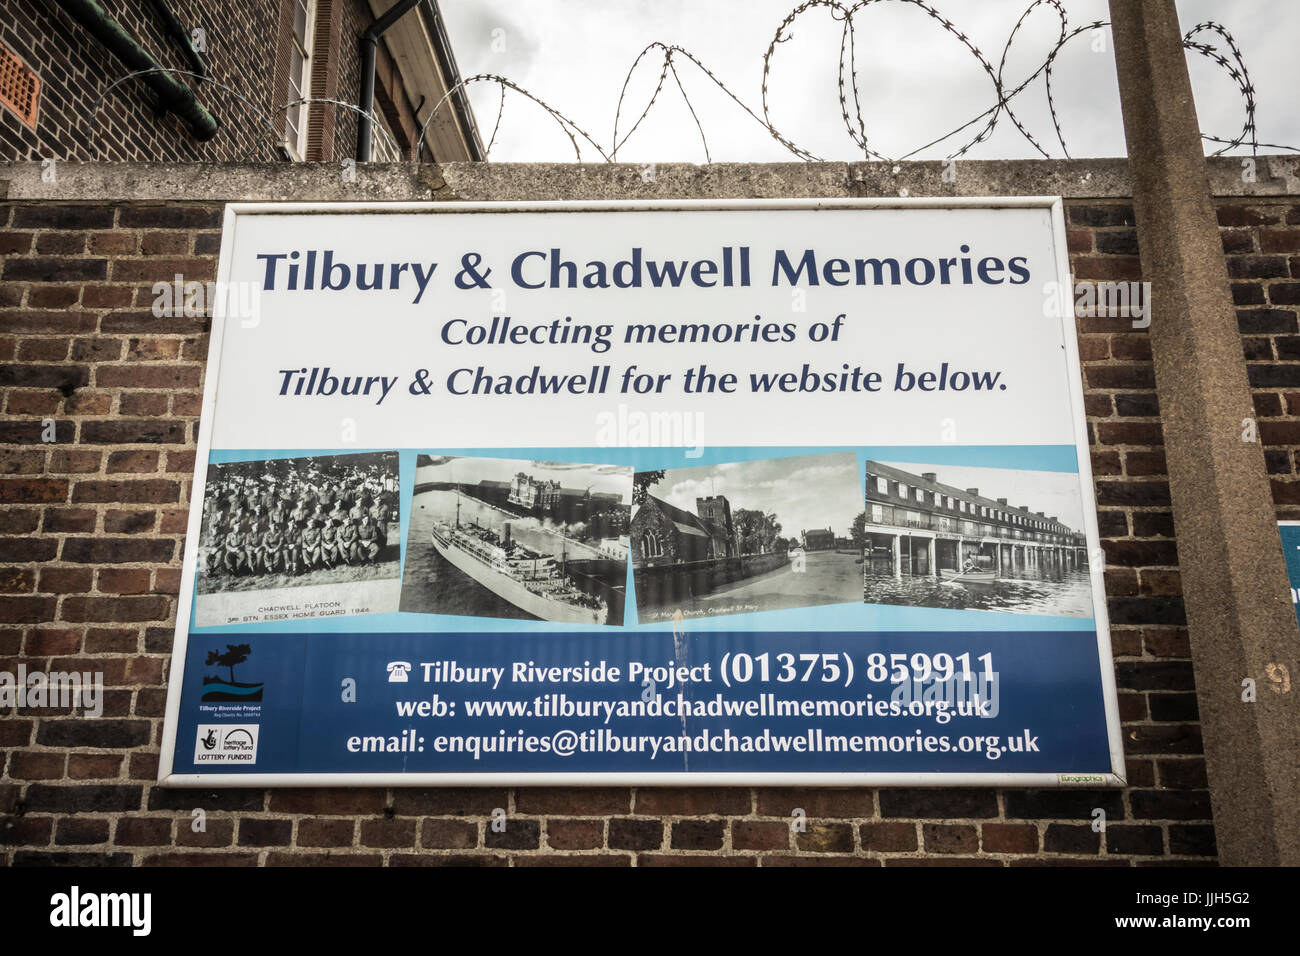 Tilbury and Chadwell Memories Stock Photo